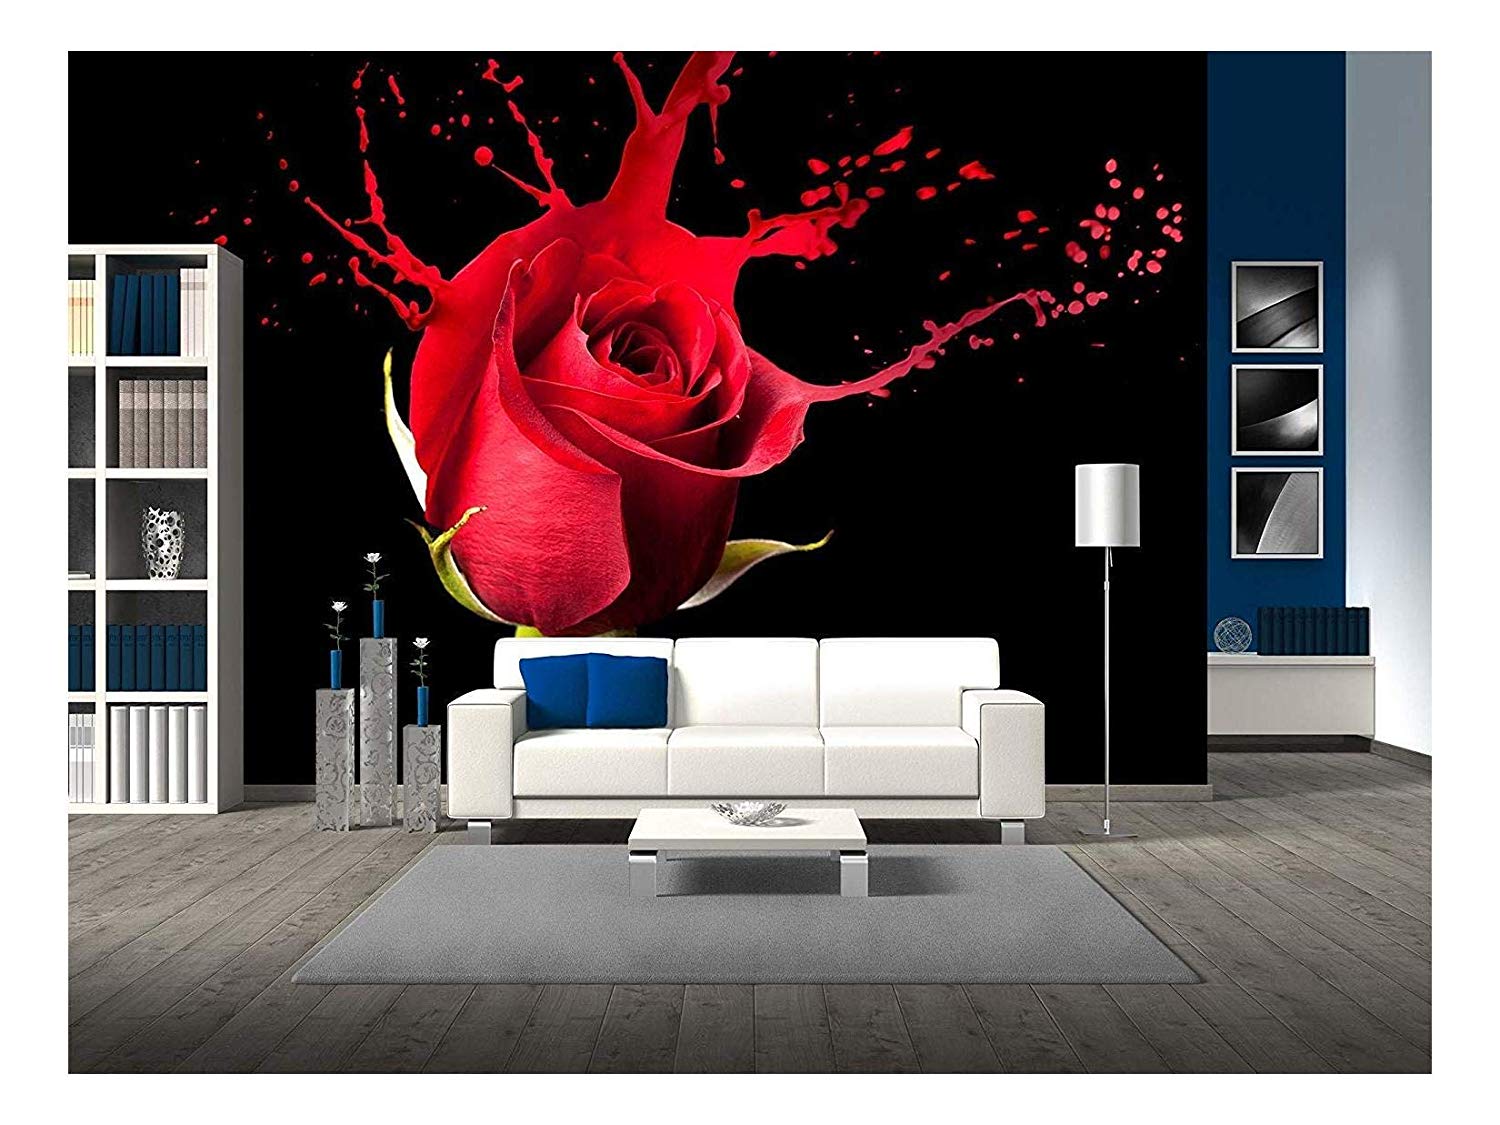 Amazon - Com - Wall26 - Red Rose With Red Splashes - Self Adhesive Wallpaper Designs Amazon , HD Wallpaper & Backgrounds